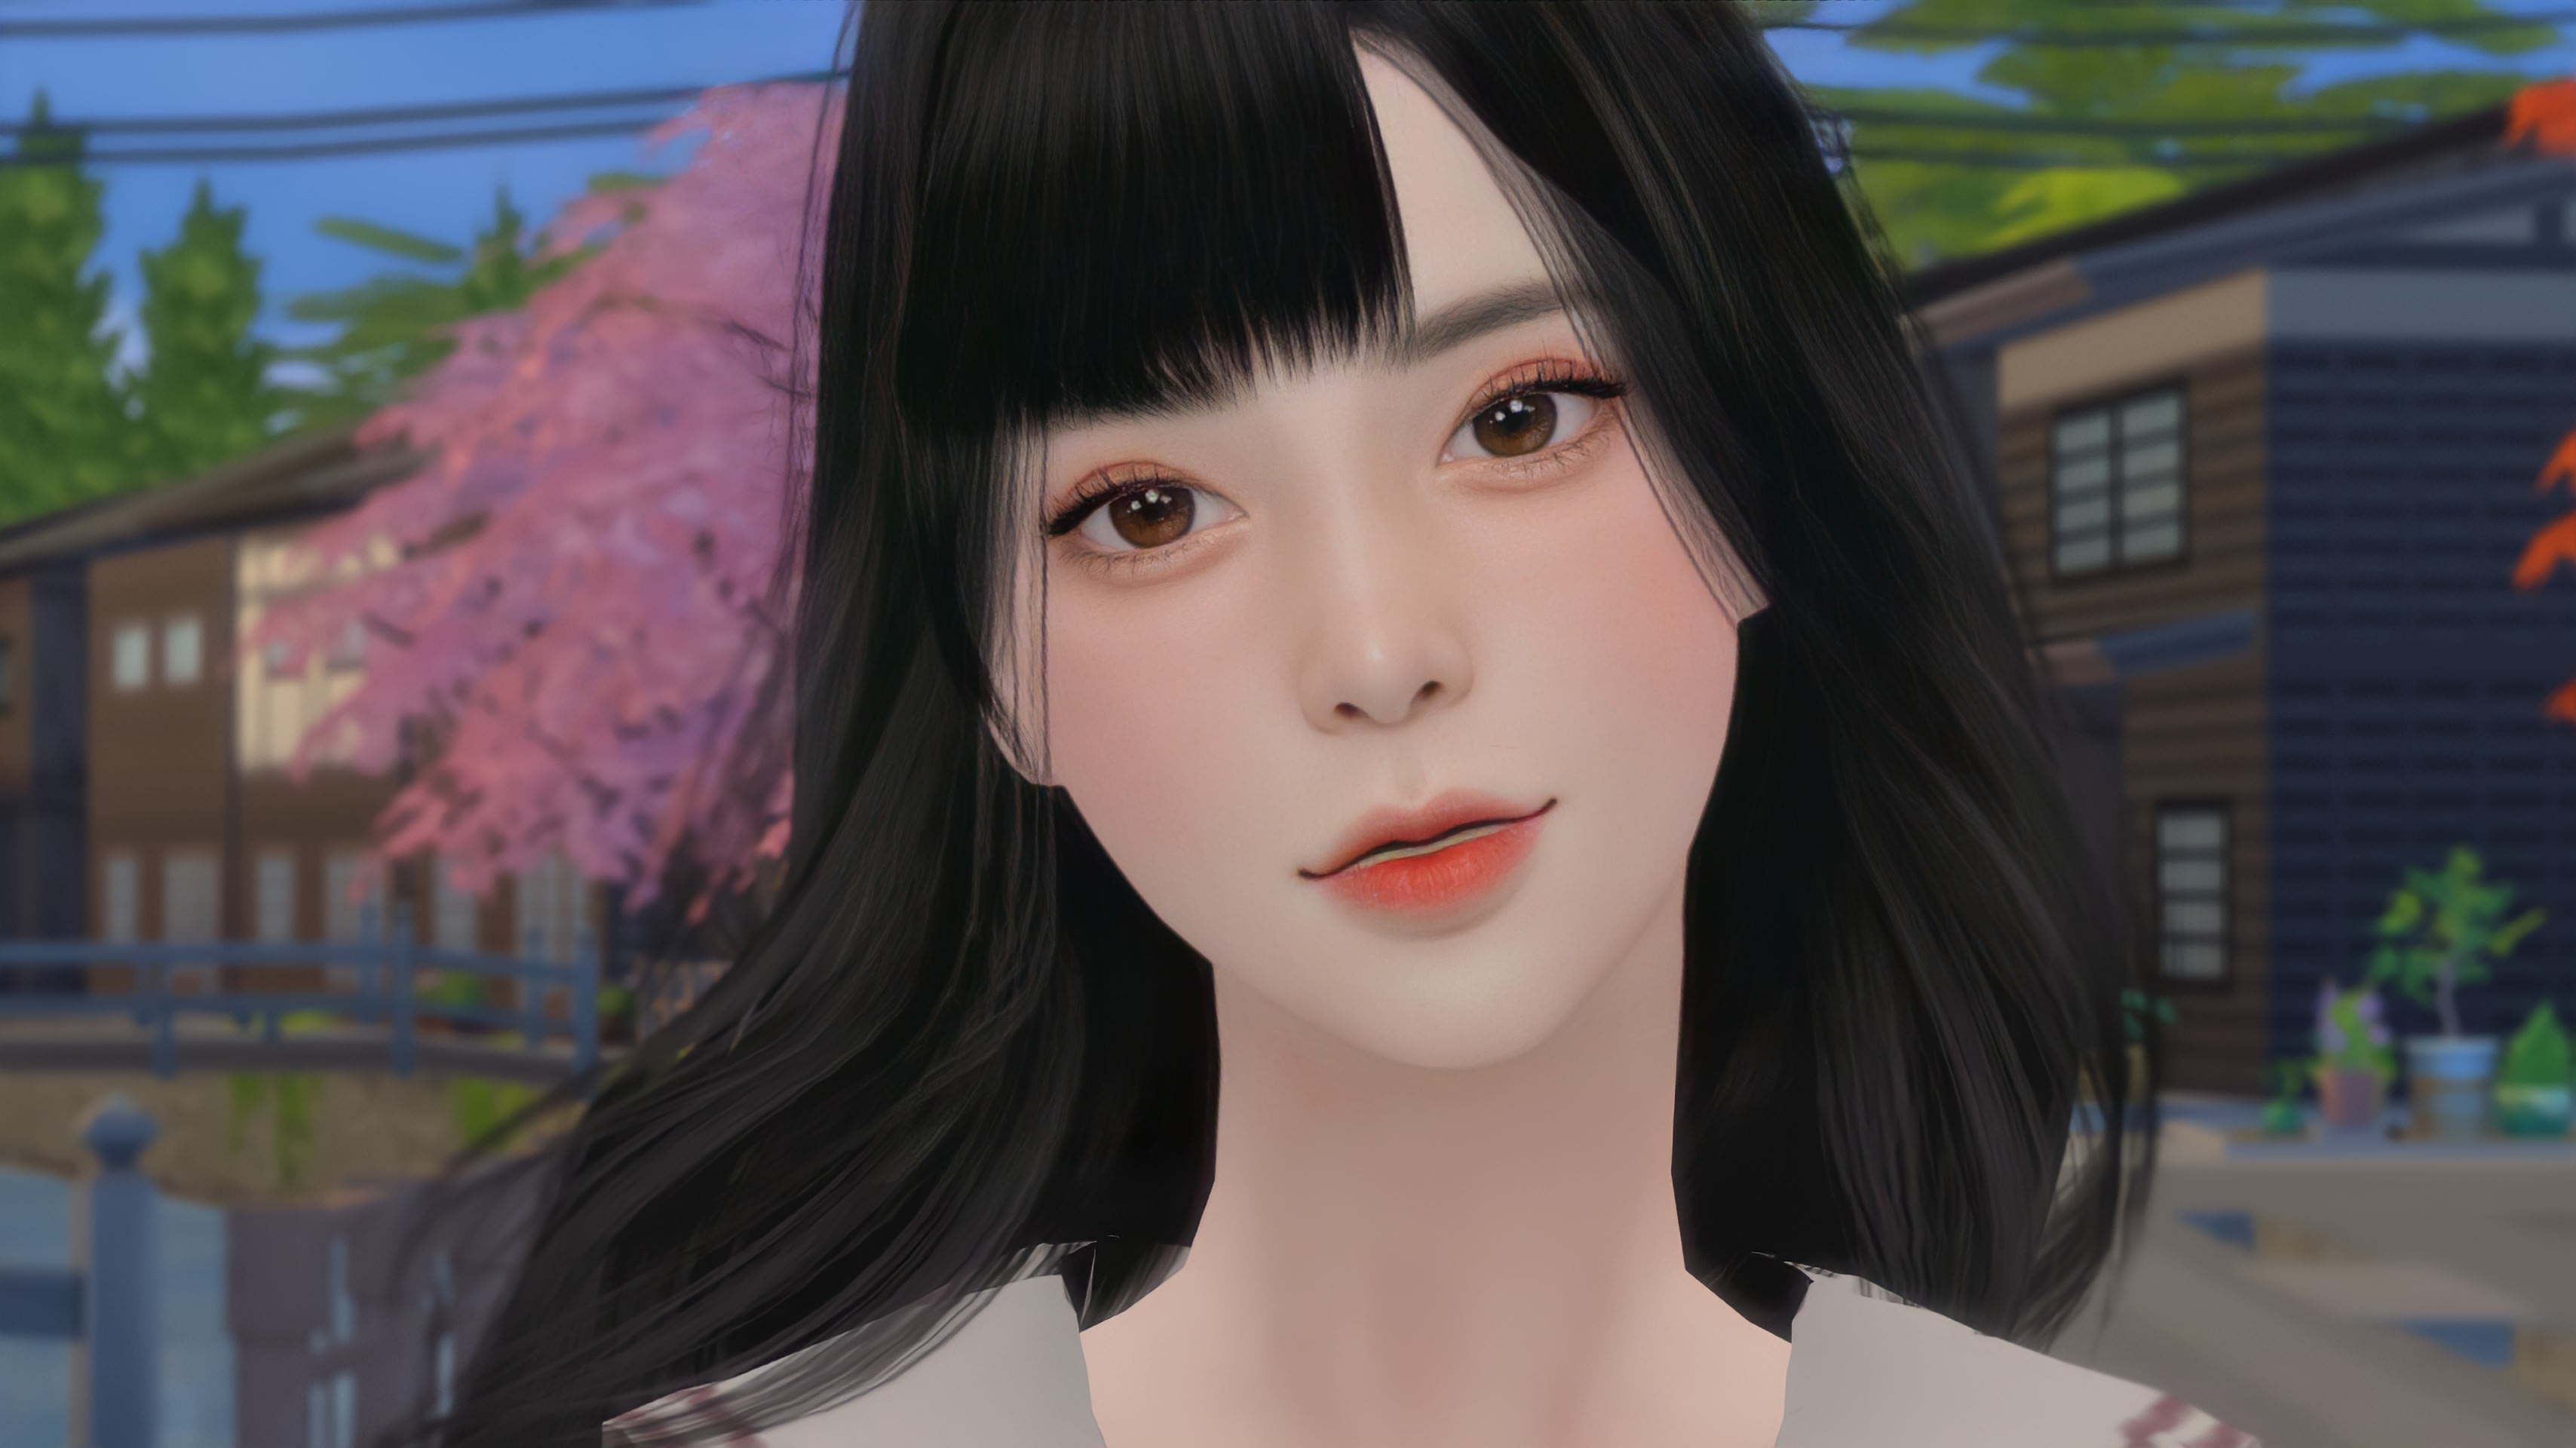 Anime Cute Poses by jmac13 at Mod The Sims » Sims 4 Updates